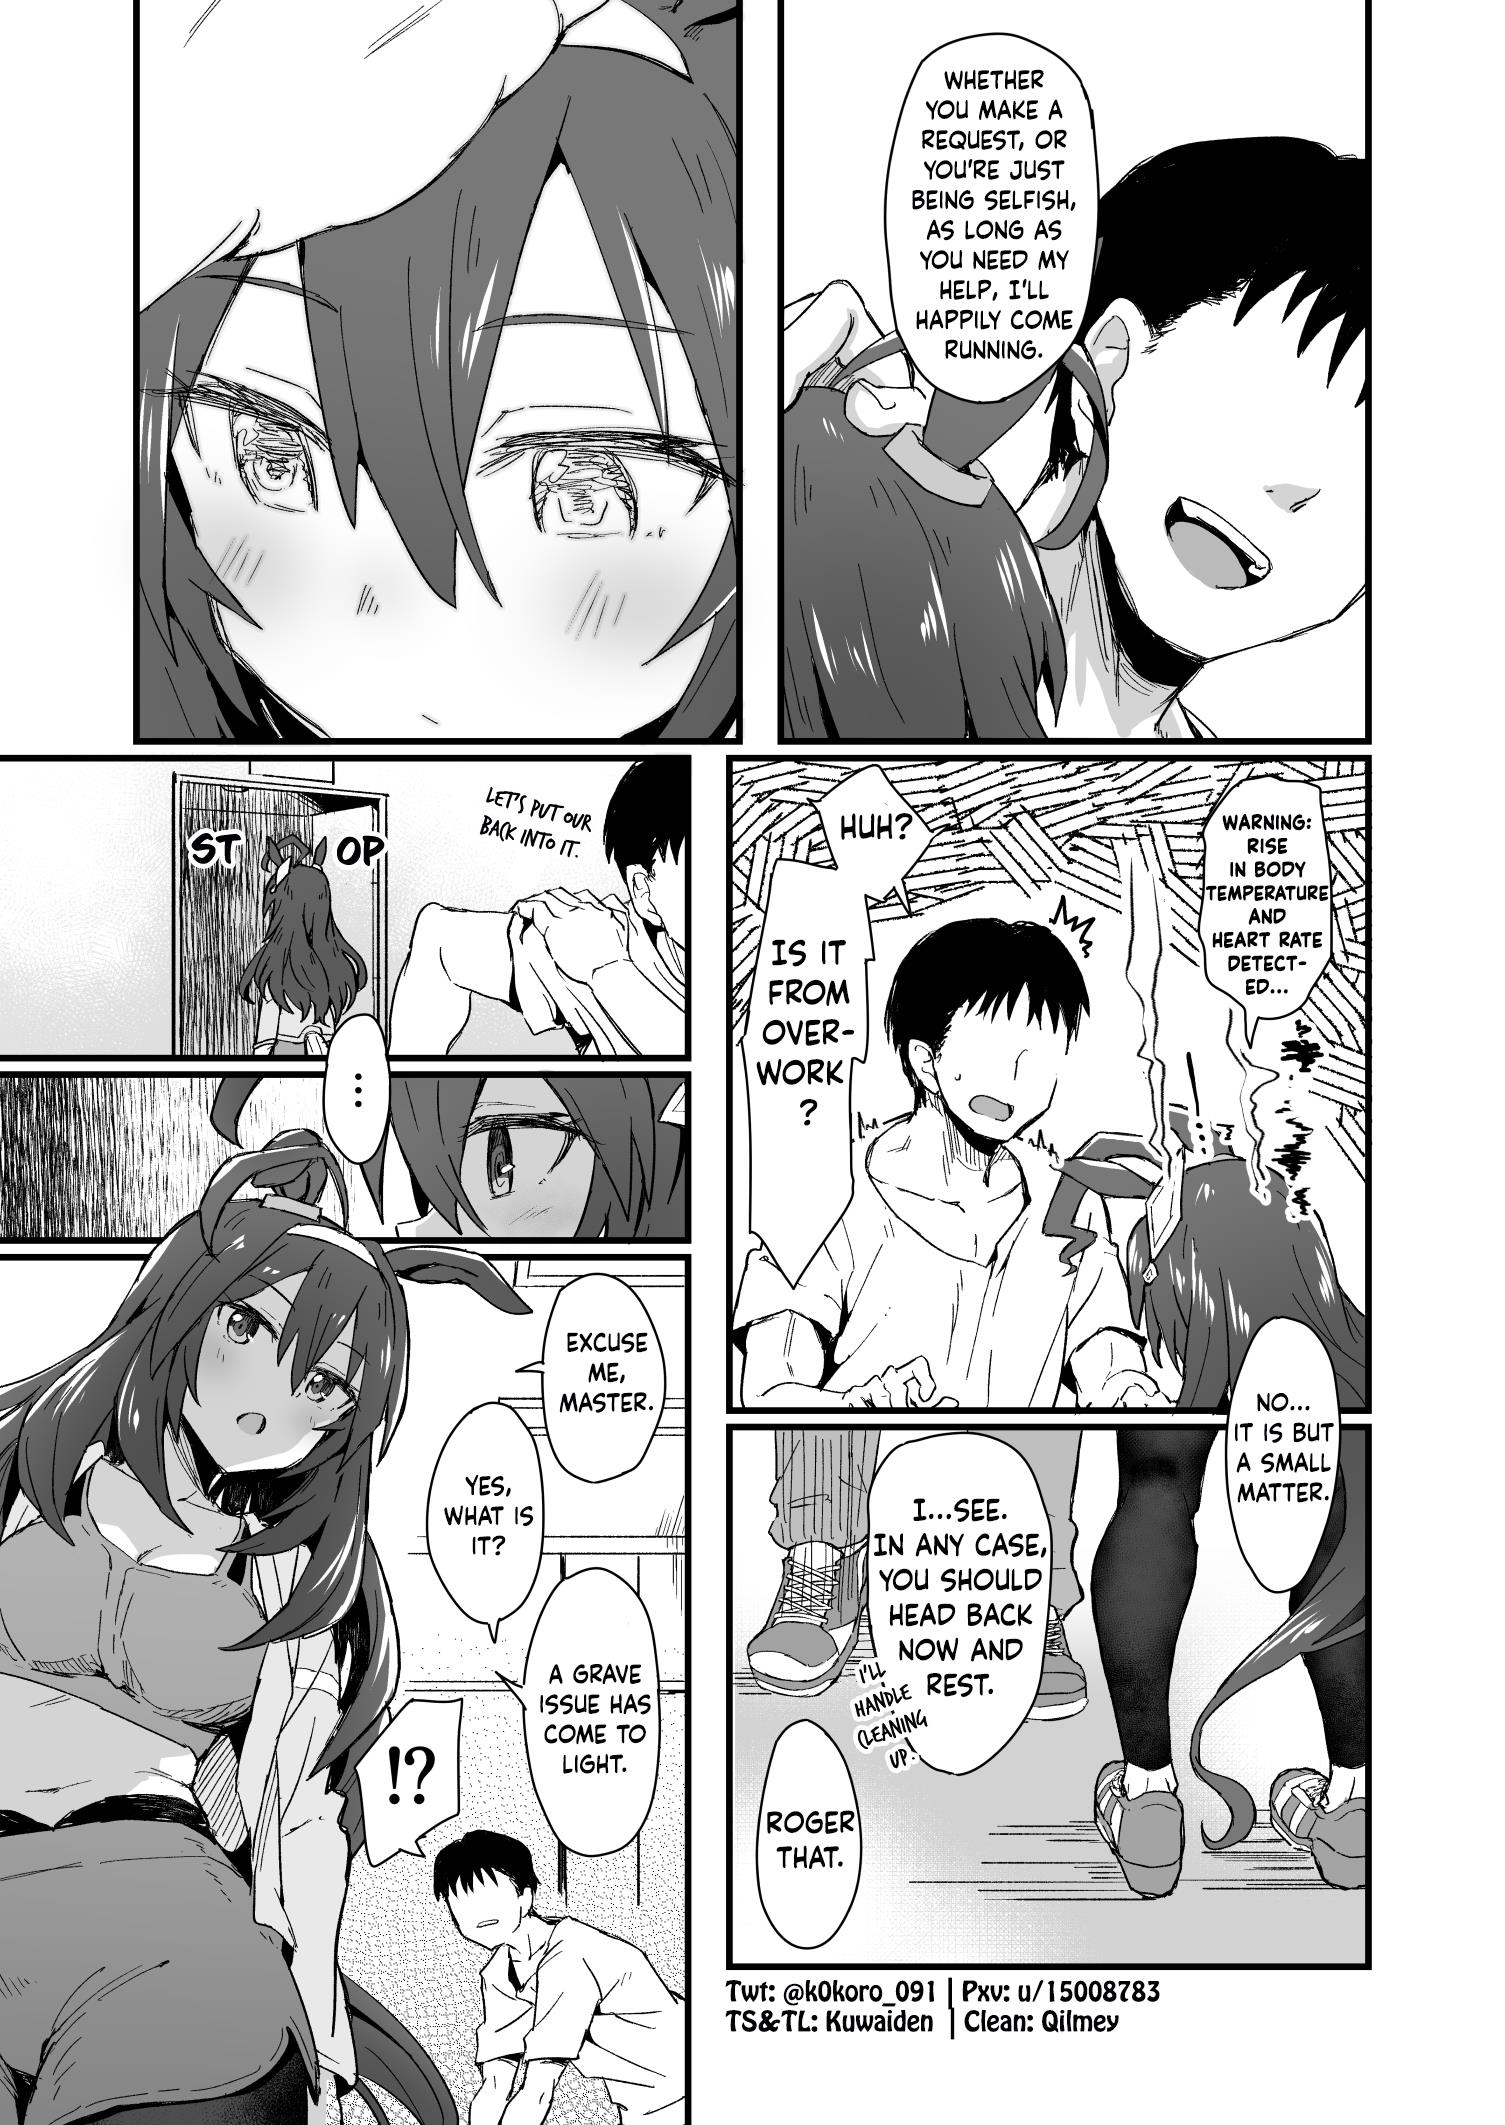 Kokoro-Sensei's Umamusume Shorts (Doujinshi) Chapter 11: Power Type Bourbon, And The Trainer With Whom She Has High Affection For - Picture 3